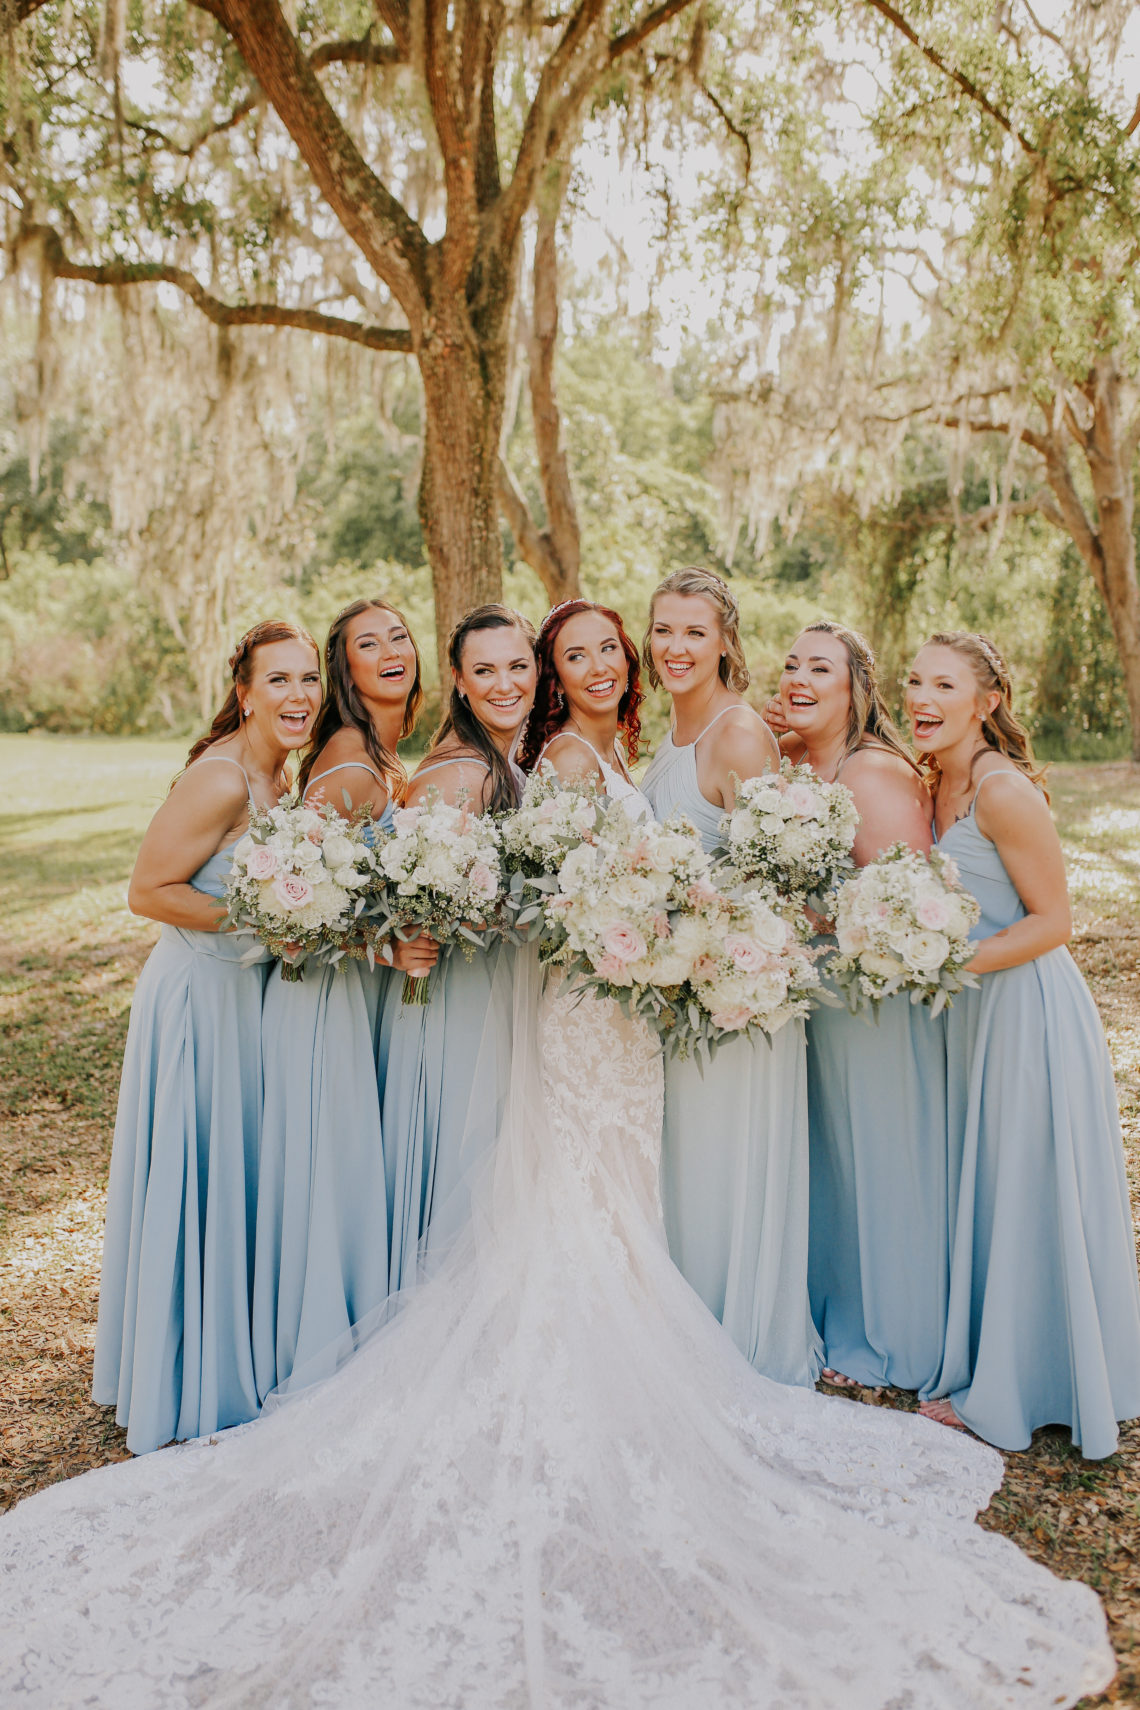 Our Tampa Wedding Vendors: Part 2 - The Relatable Red